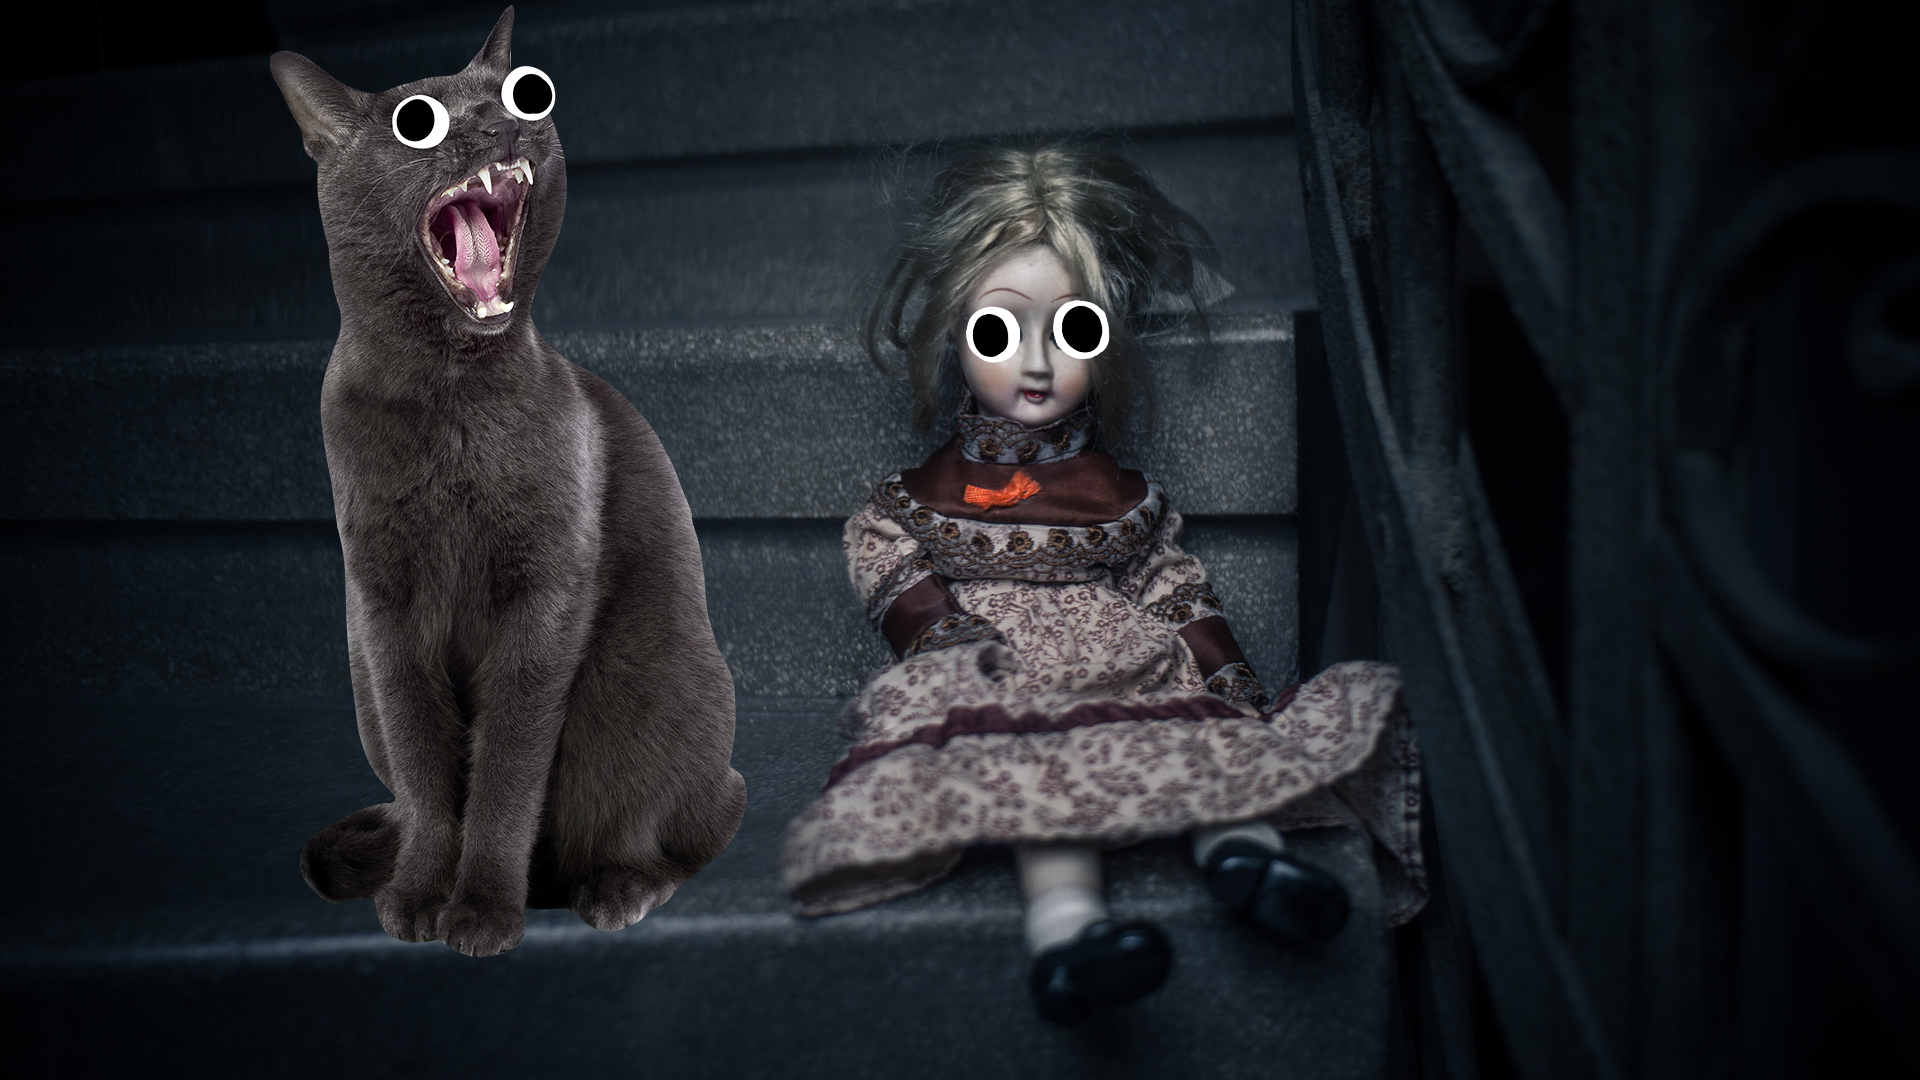 Creepy doll on staircase with Beano cat